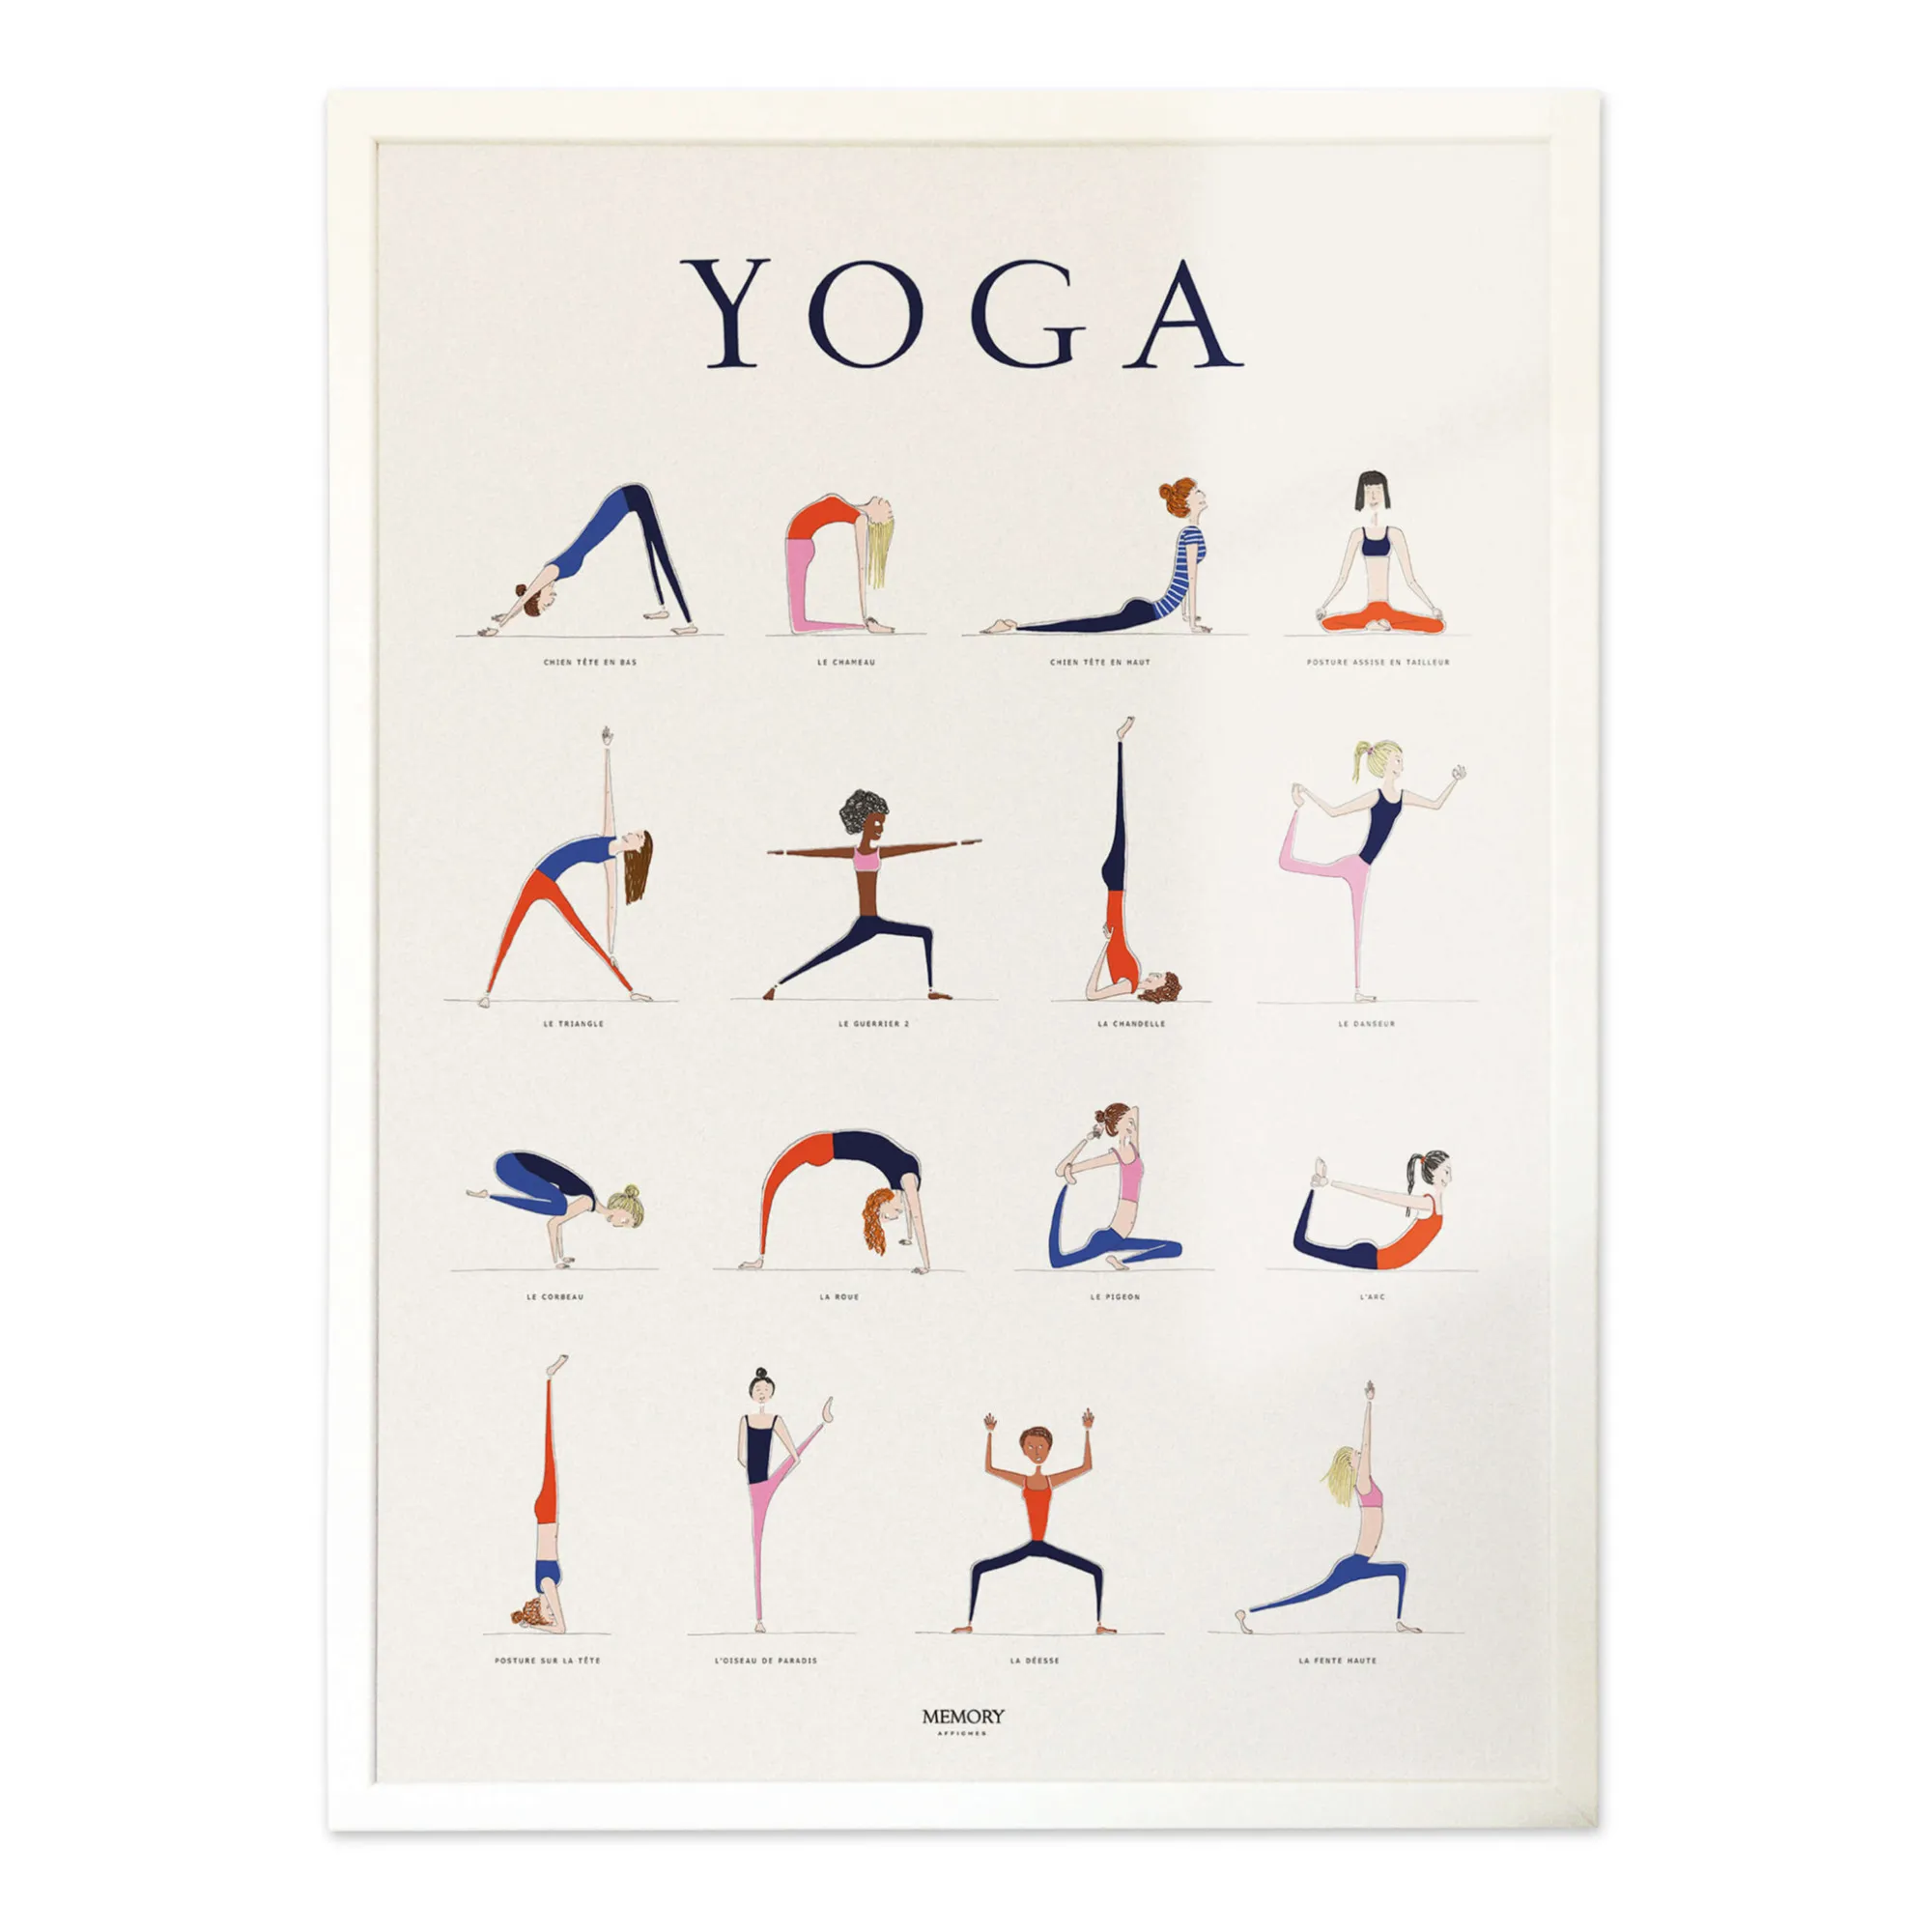  Vive Yoga Poster - Poses for Beginners and Experts